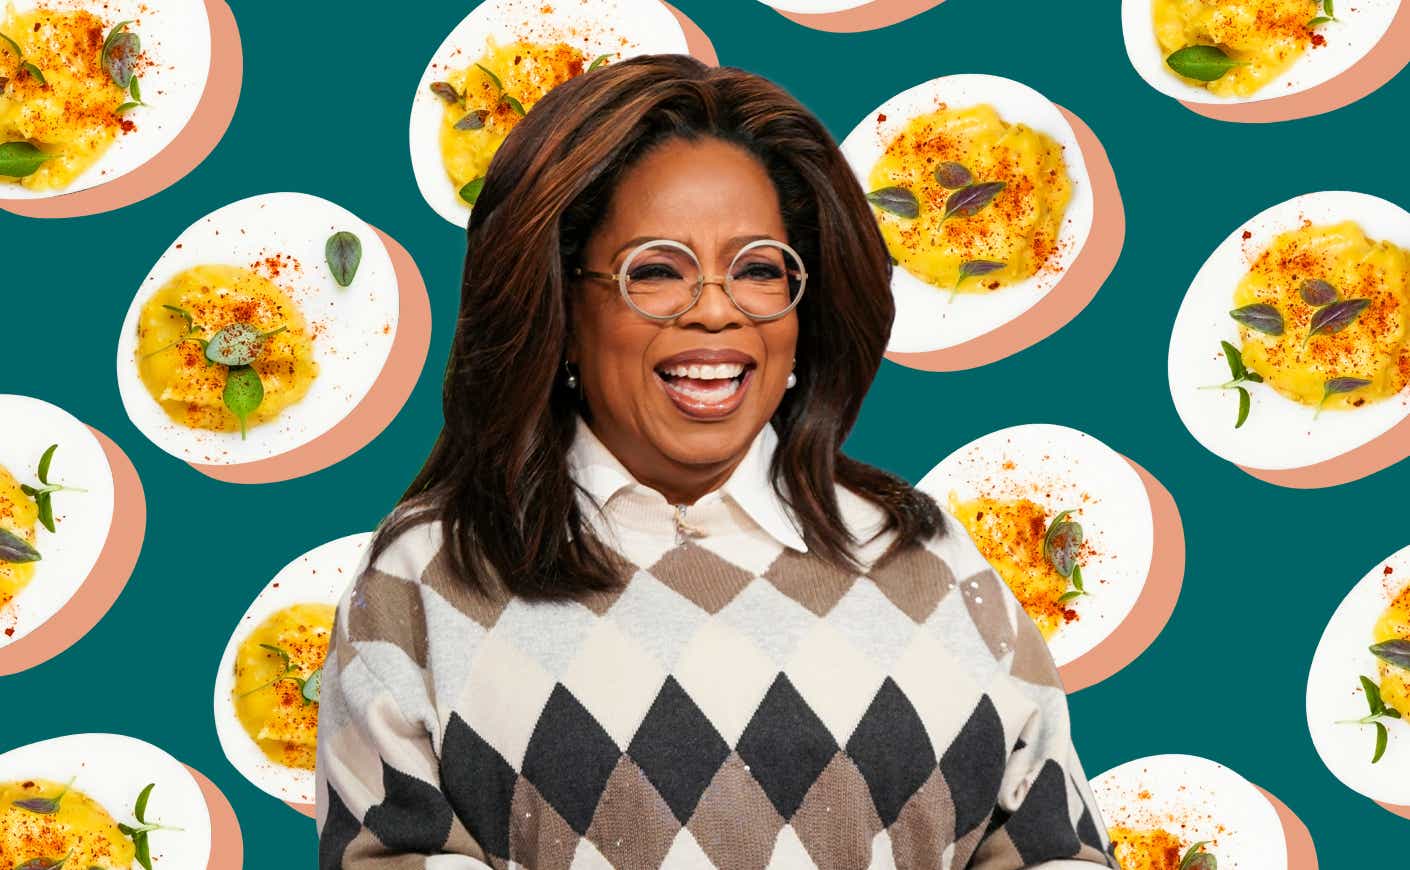 Oprah Winfrey smiles widely in front of a background of floating deviled egg graphics.